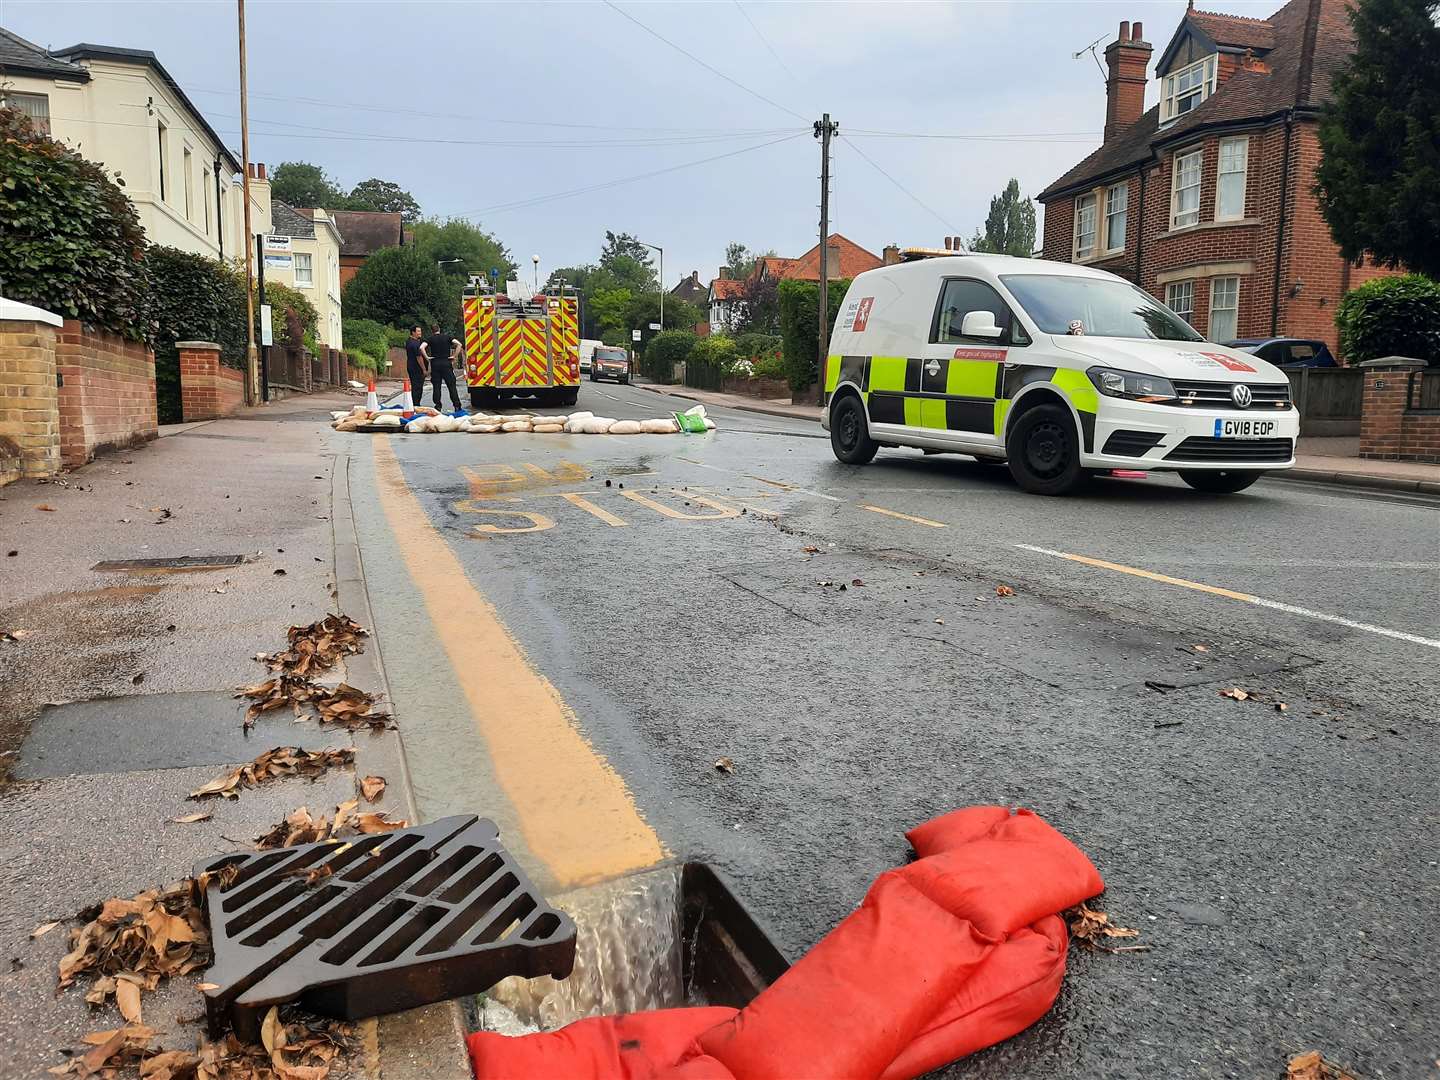 Fire engines and Kent County Council vehicles were spotted at the scene this morning